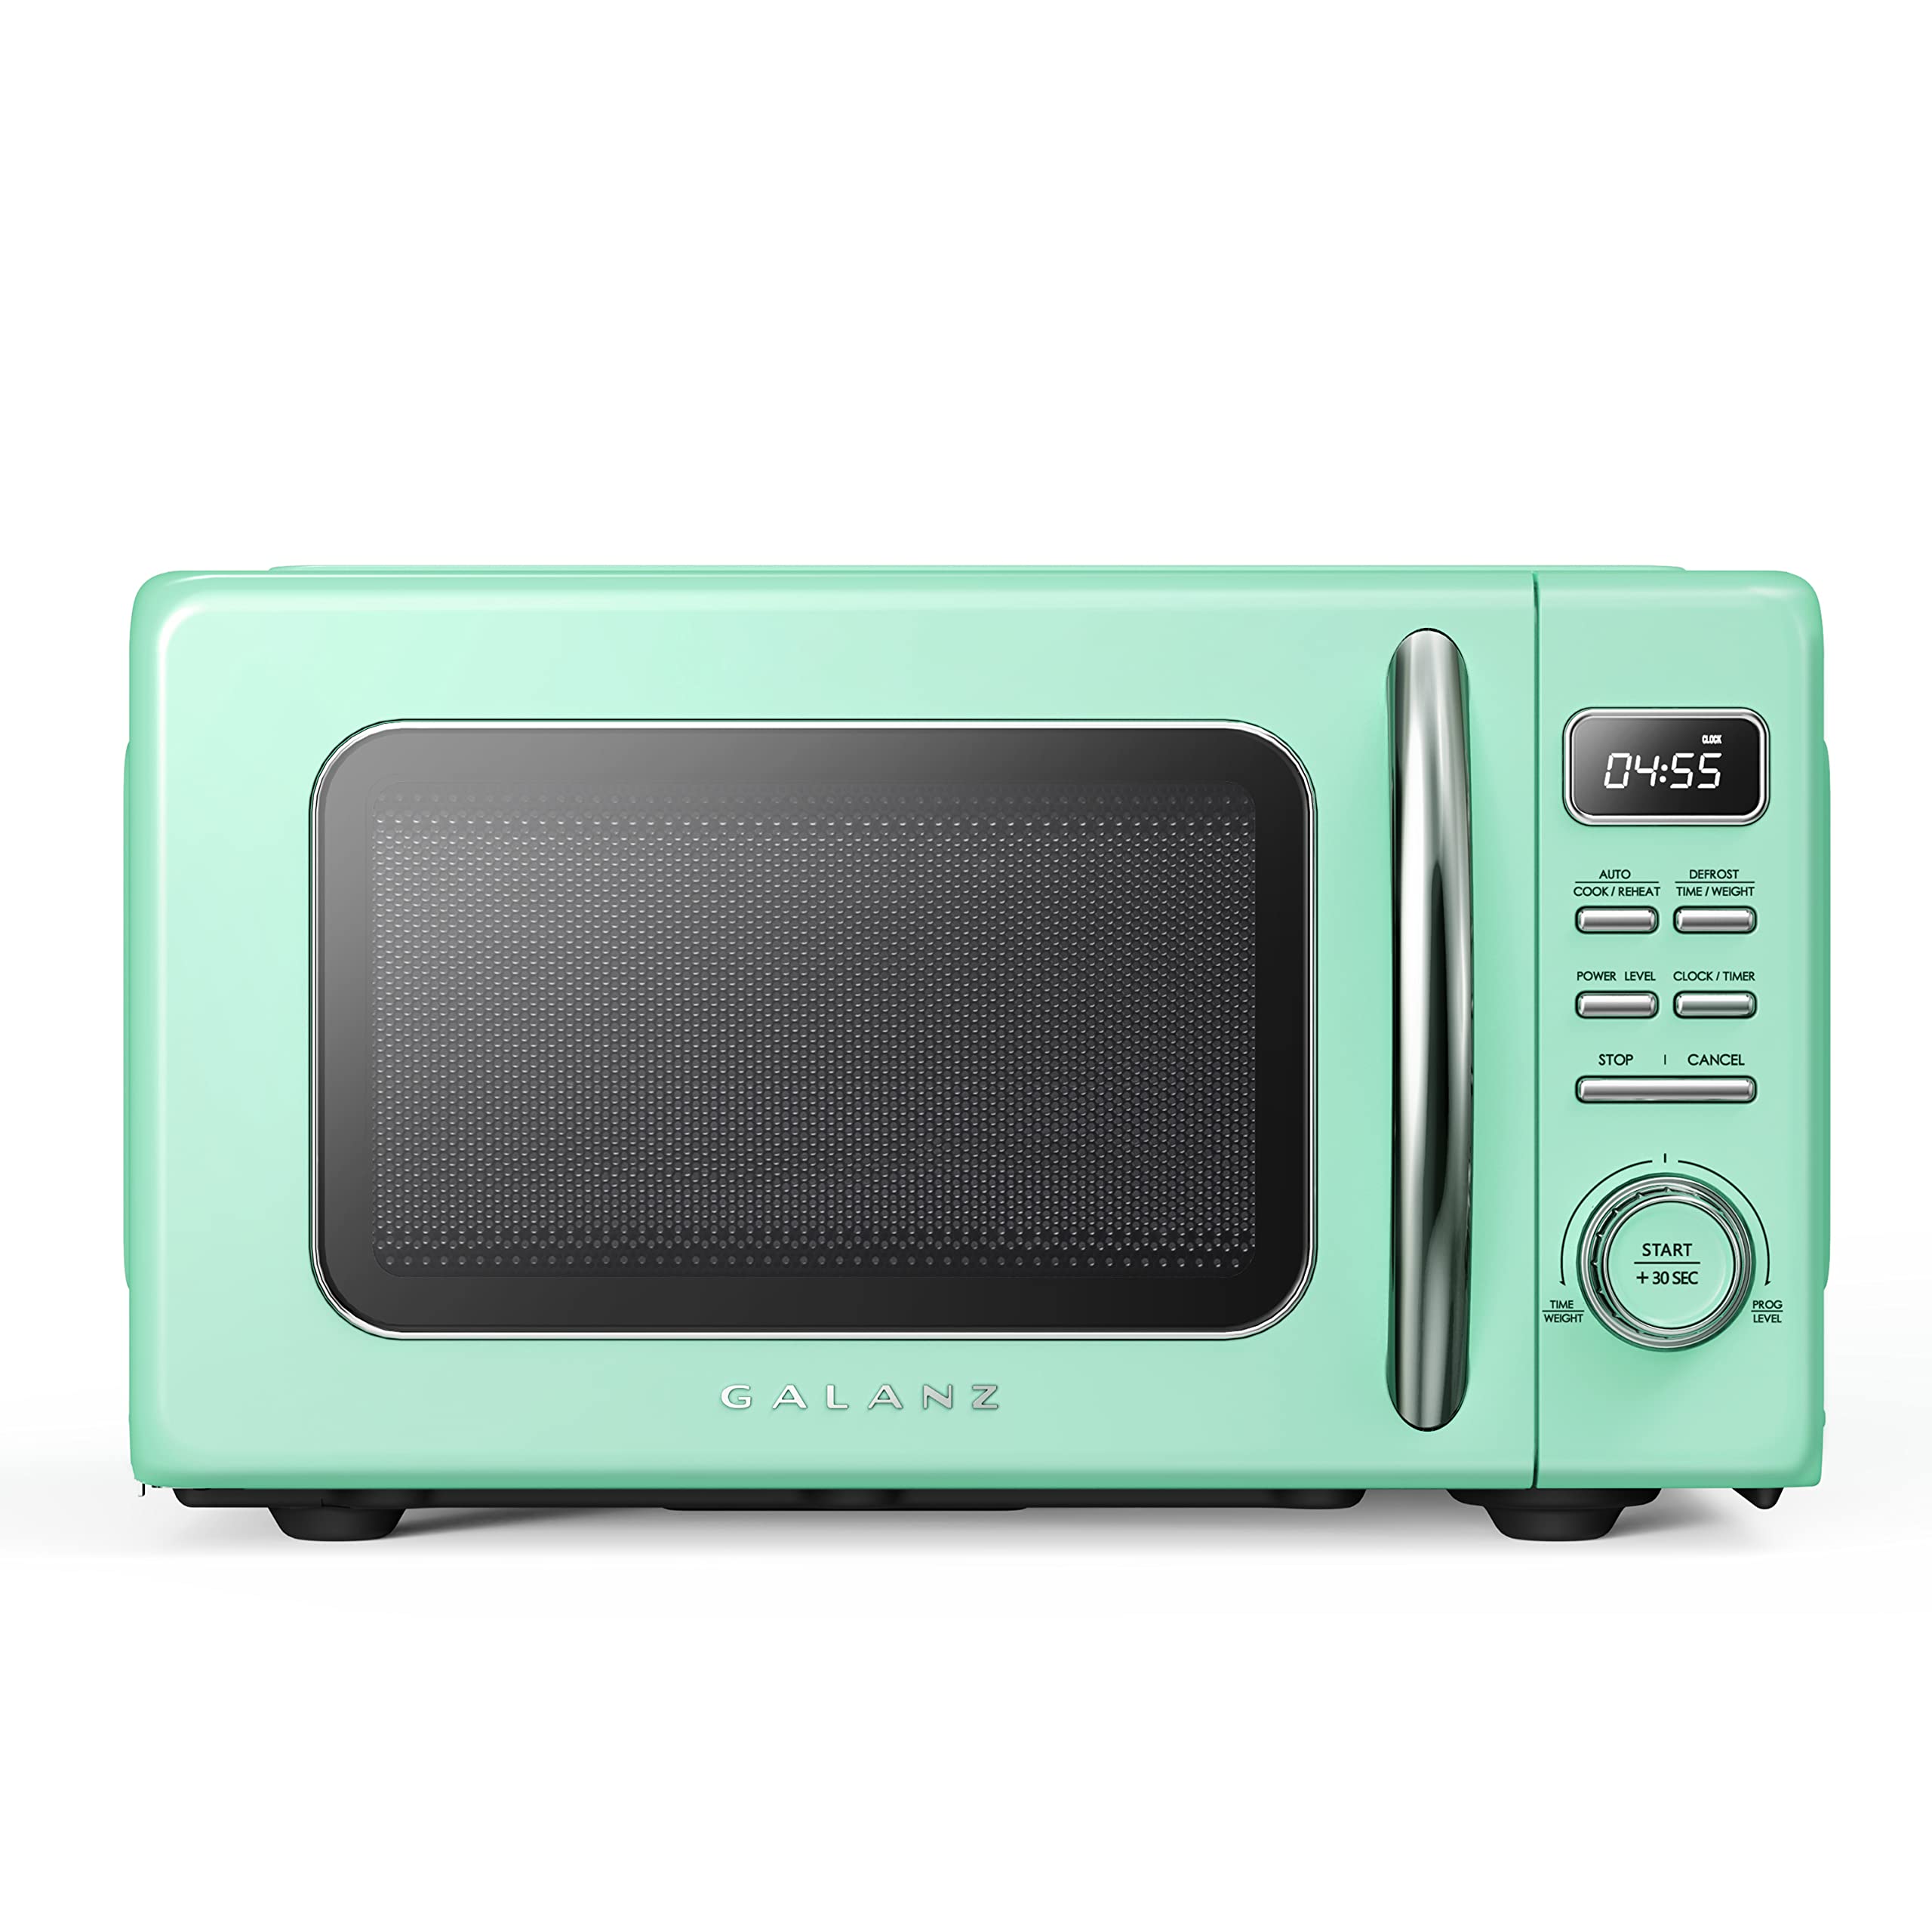 galanz gLcMKZ09gNR09 Retro countertop Microwave Oven with Auto cook & Reheat, Defrost, Quick Start Functions, Easy clean with gl